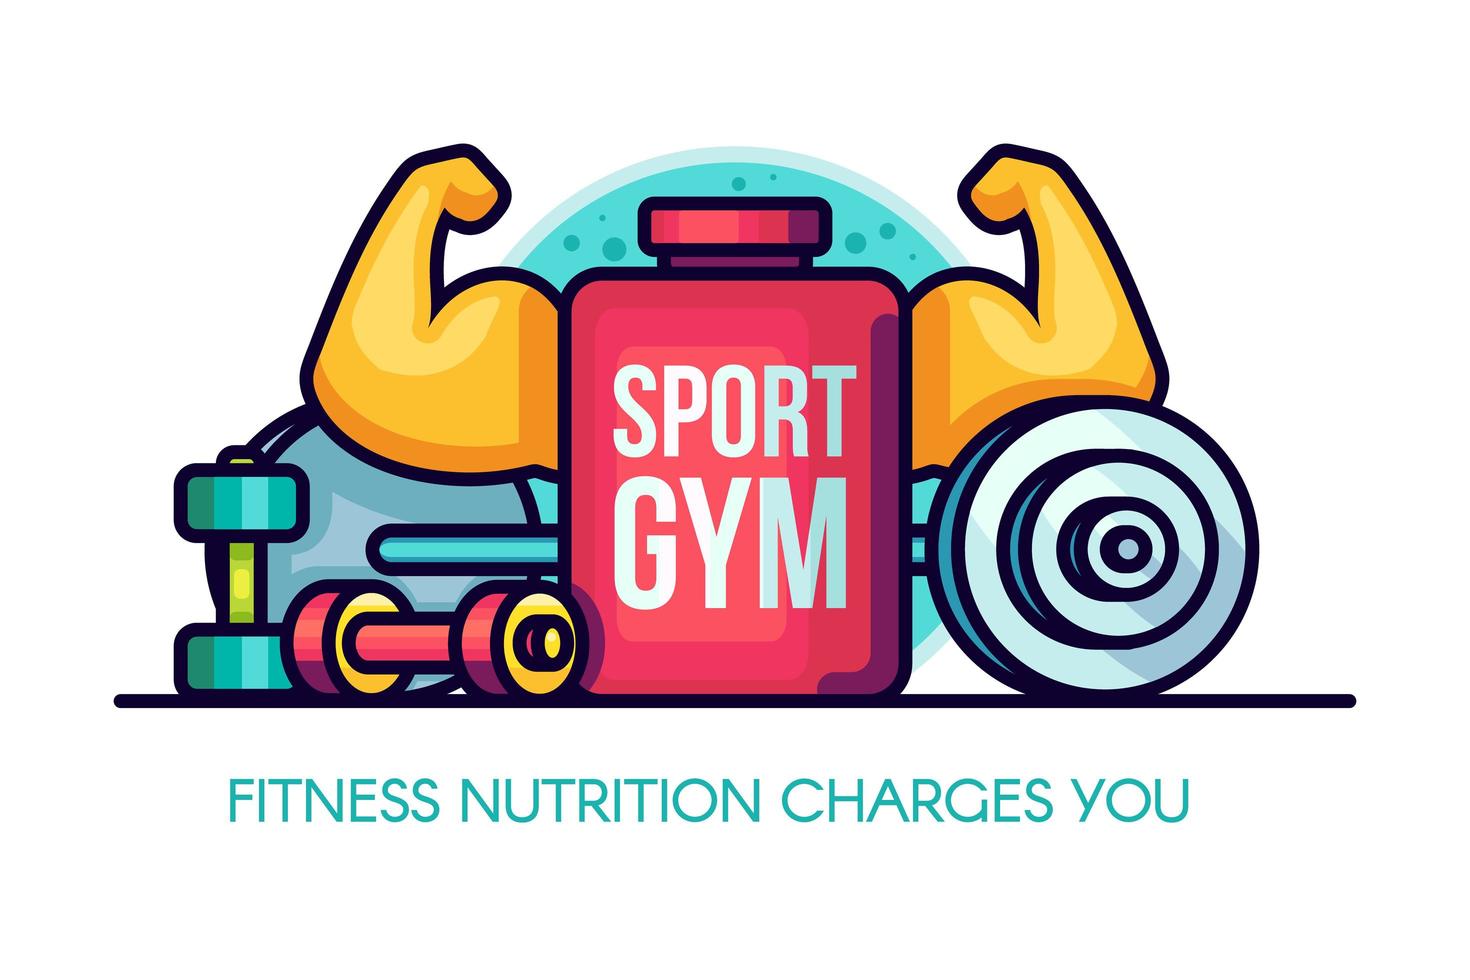 Sports GYM Nutrition Illustration with muscular arms, vessel, sports nutrition, dumbbells, barbell vector